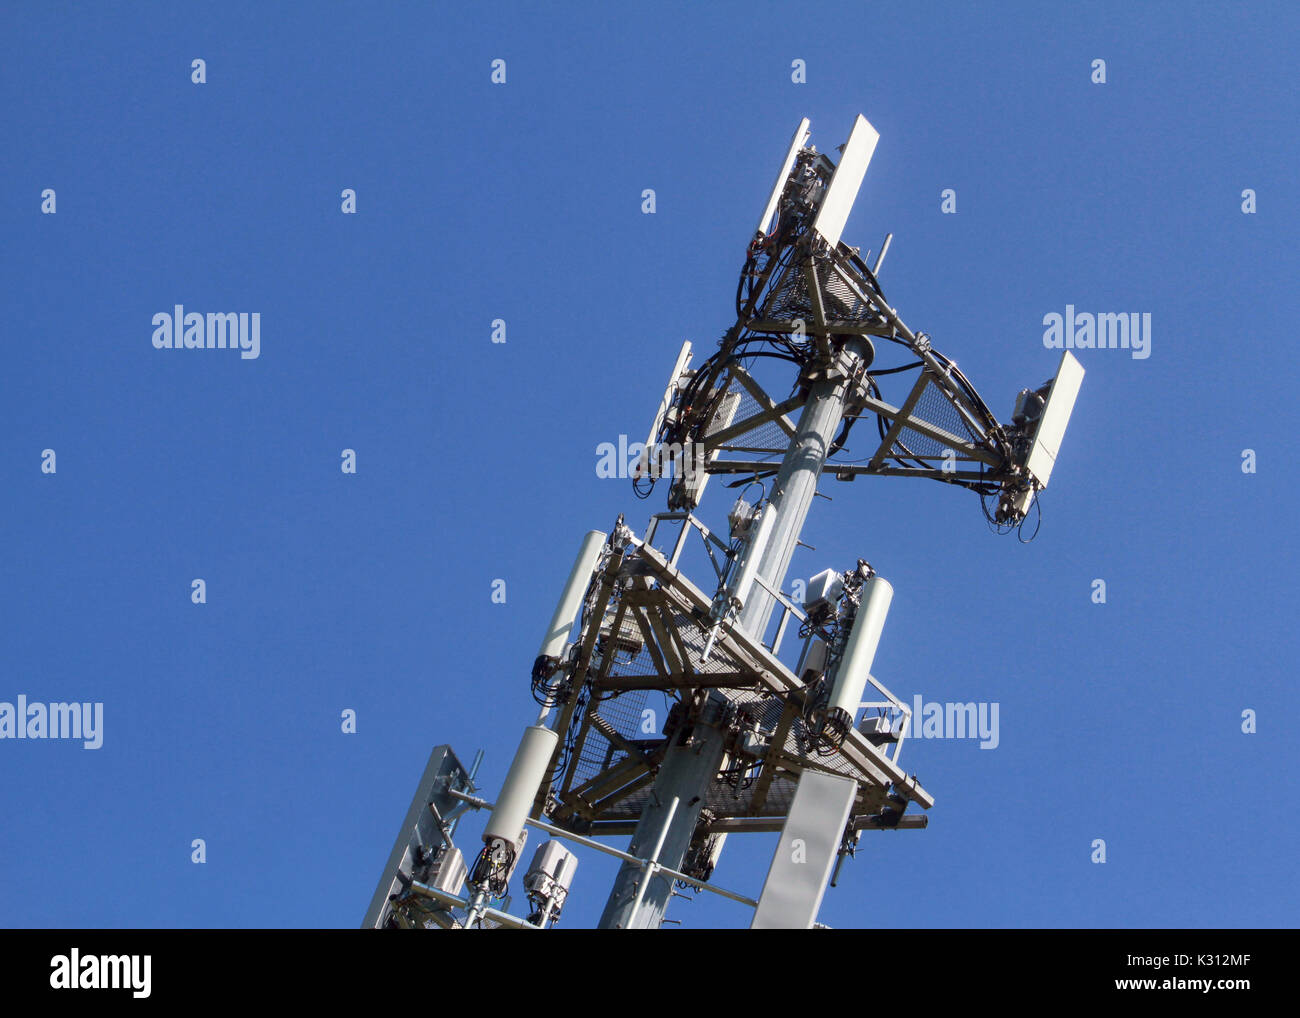 The top of a communications cellular tower stands out against a clear blue sky. Stock Photo